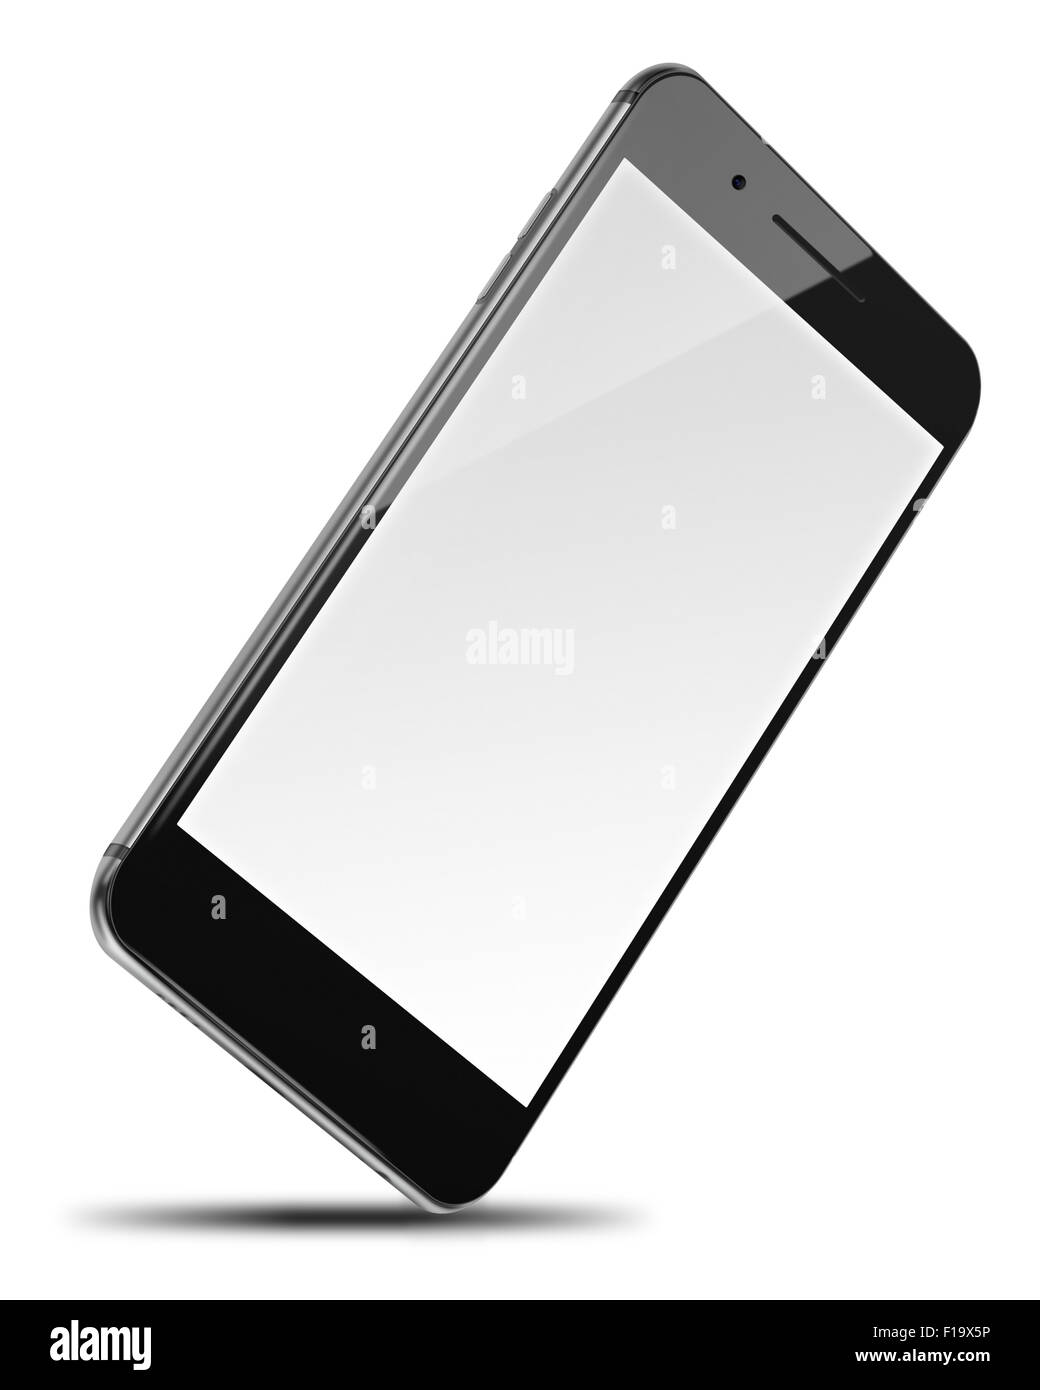 Mobile smart phone with blank screen isolated on white background. Highly detailed illustration. Stock Photo